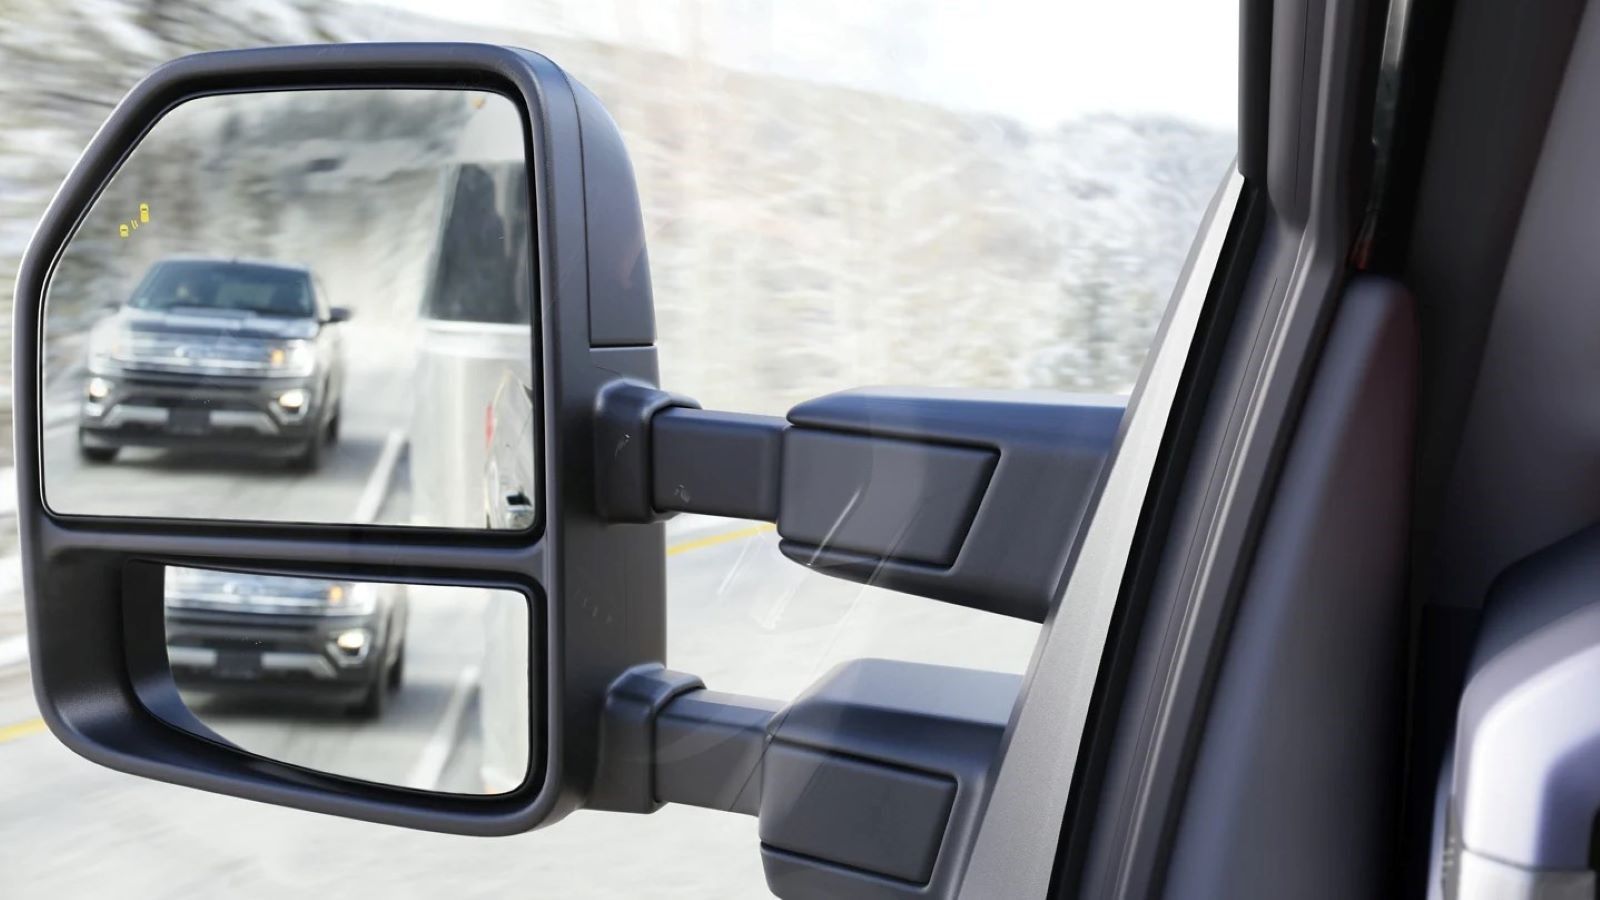 Ford F-150 dual rearview safety mirror system